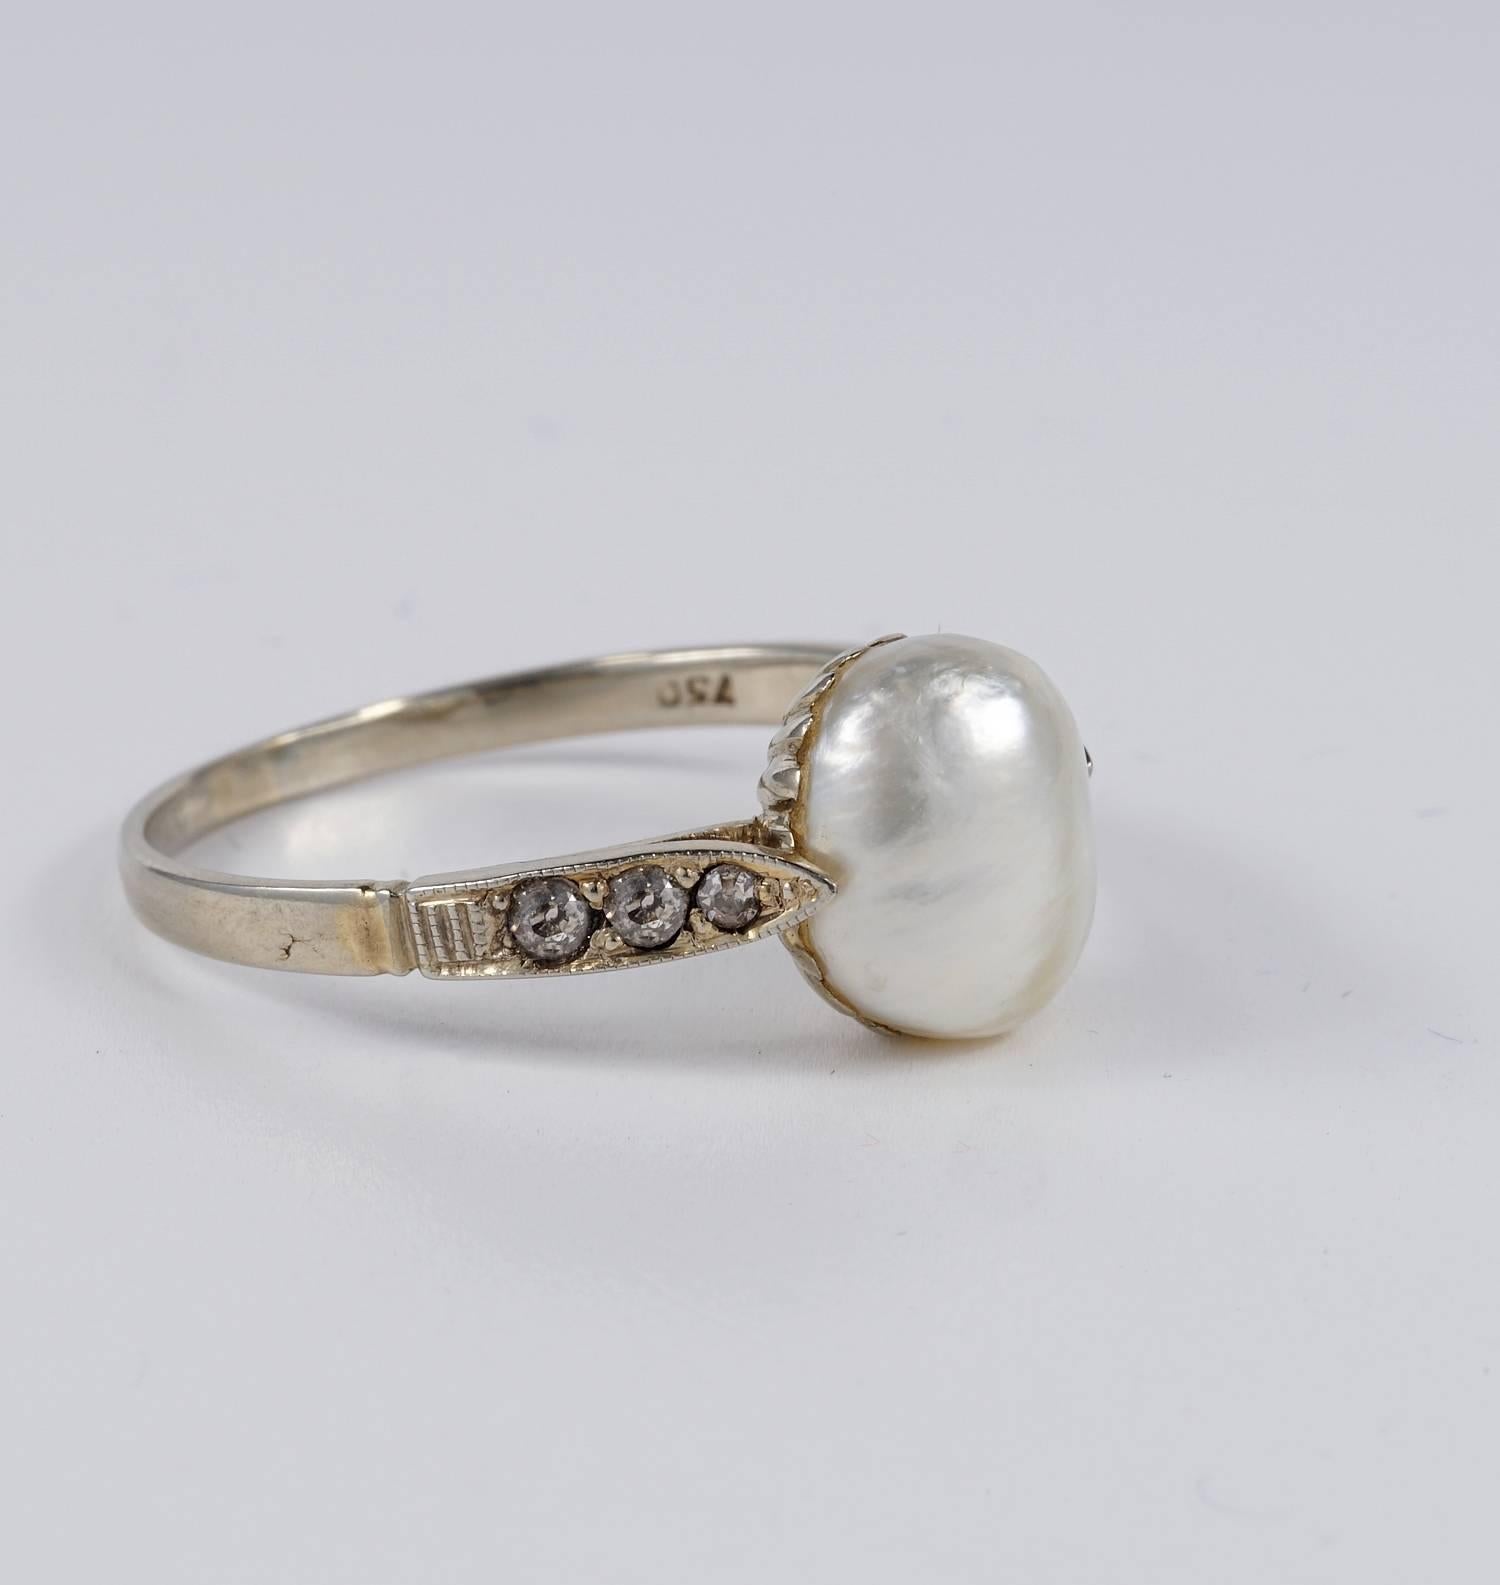 Epitome of Eternal Elegance!
An outstanding treasure from the past, rare antique Natural Basra pearl – not nucleated large size sea pearl from the Persian gulf
Authentic Edwardian period 1900 ca
Lovingly hand crafted of solid 18 KT gold – marked -